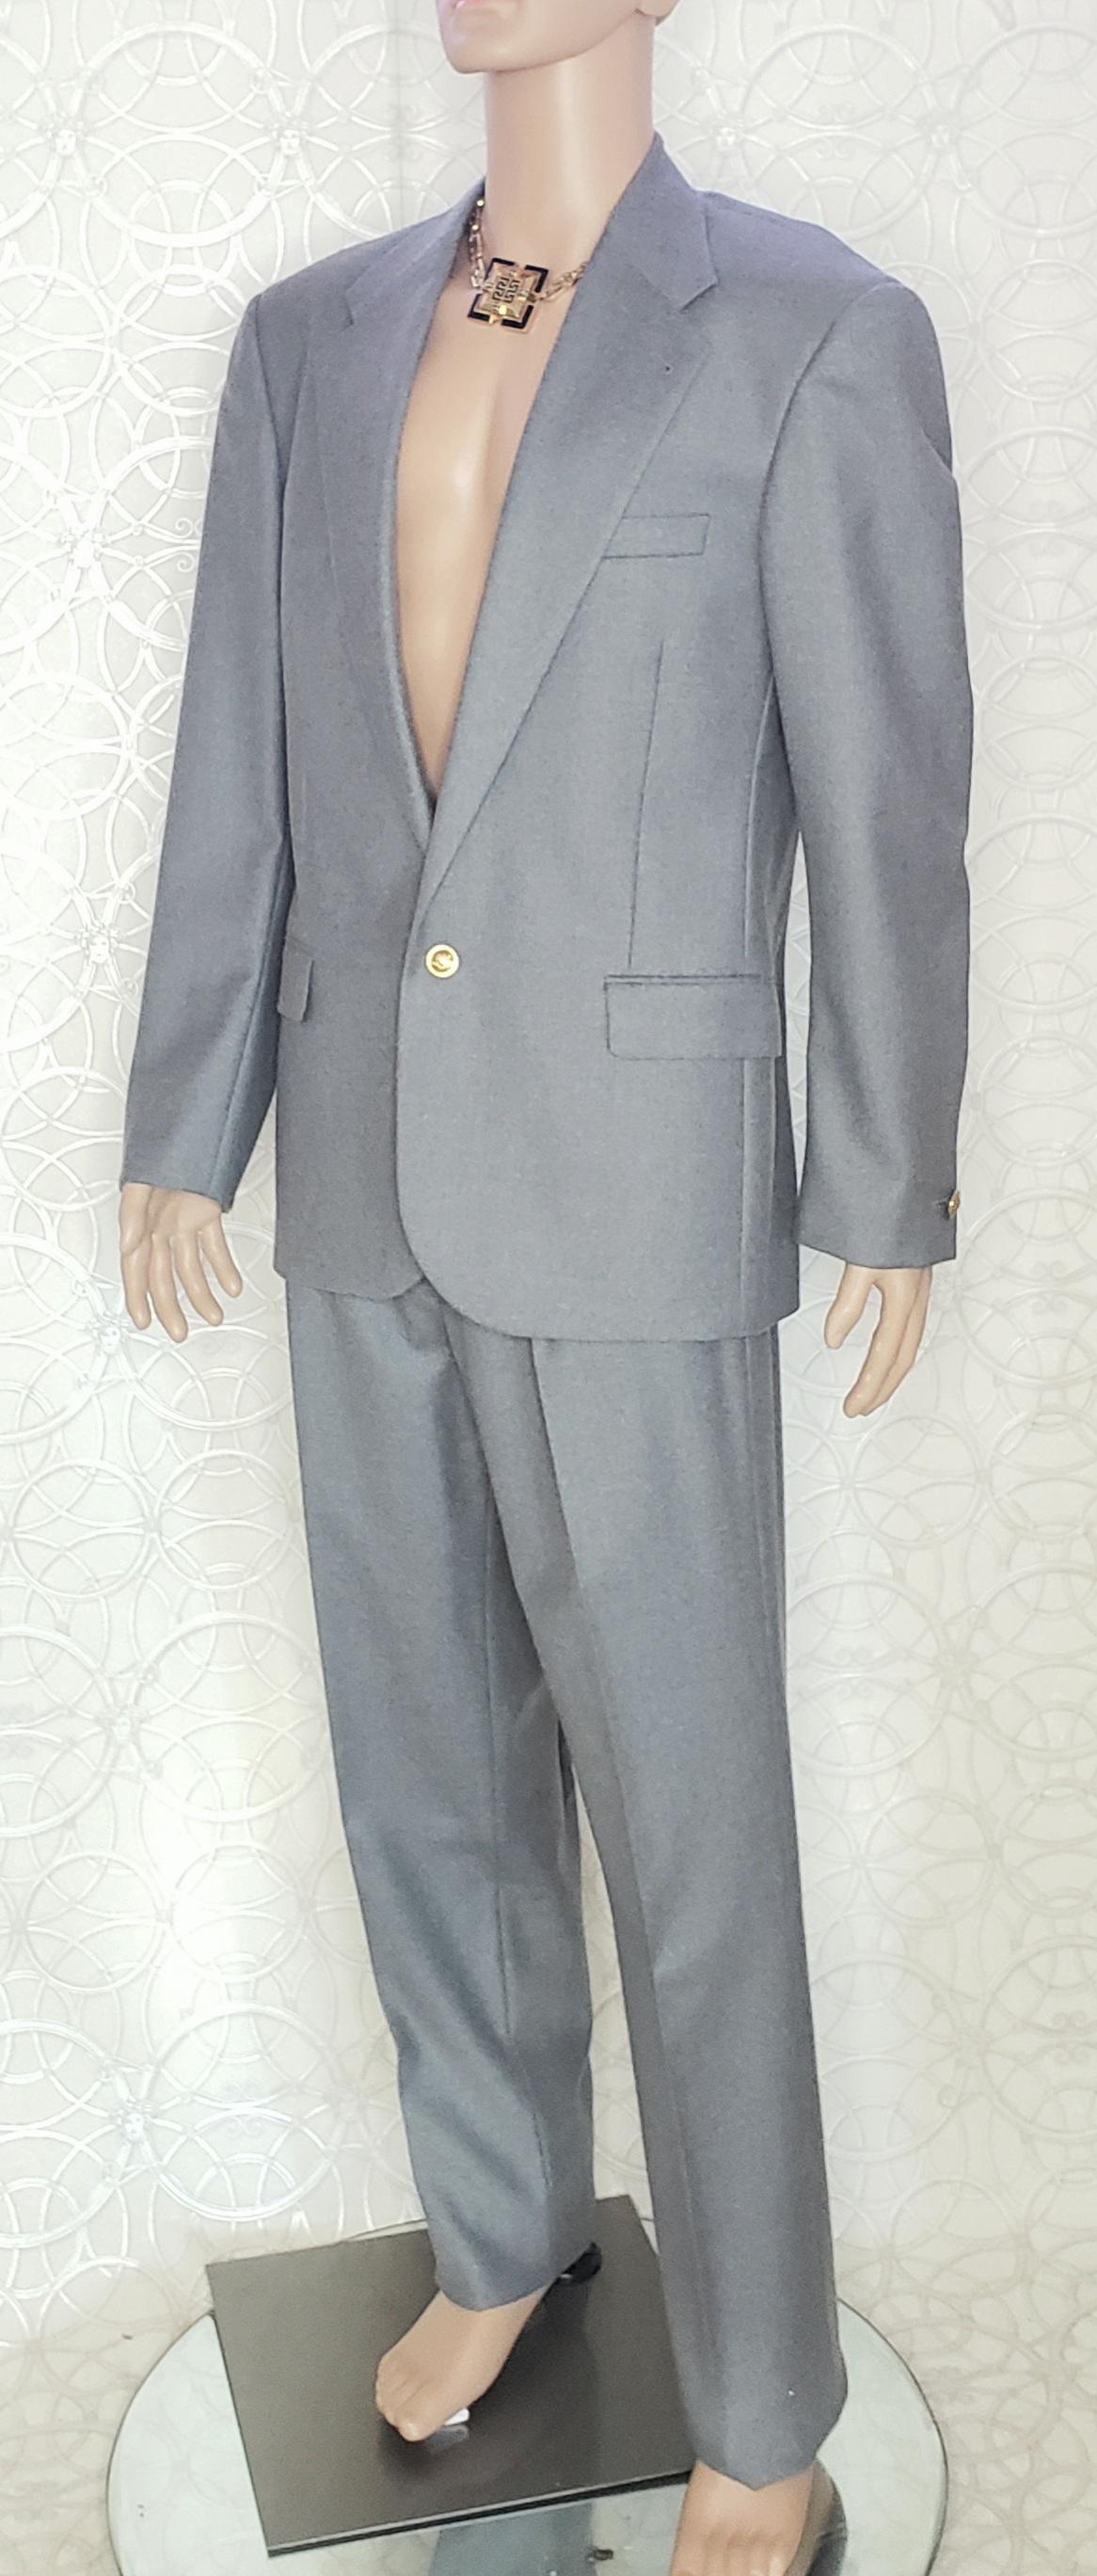 Gray VERSACE F/W 2013 look # 45 BRAND NEW GRAY WOOL SUIT 48 - 38 (M) For Sale